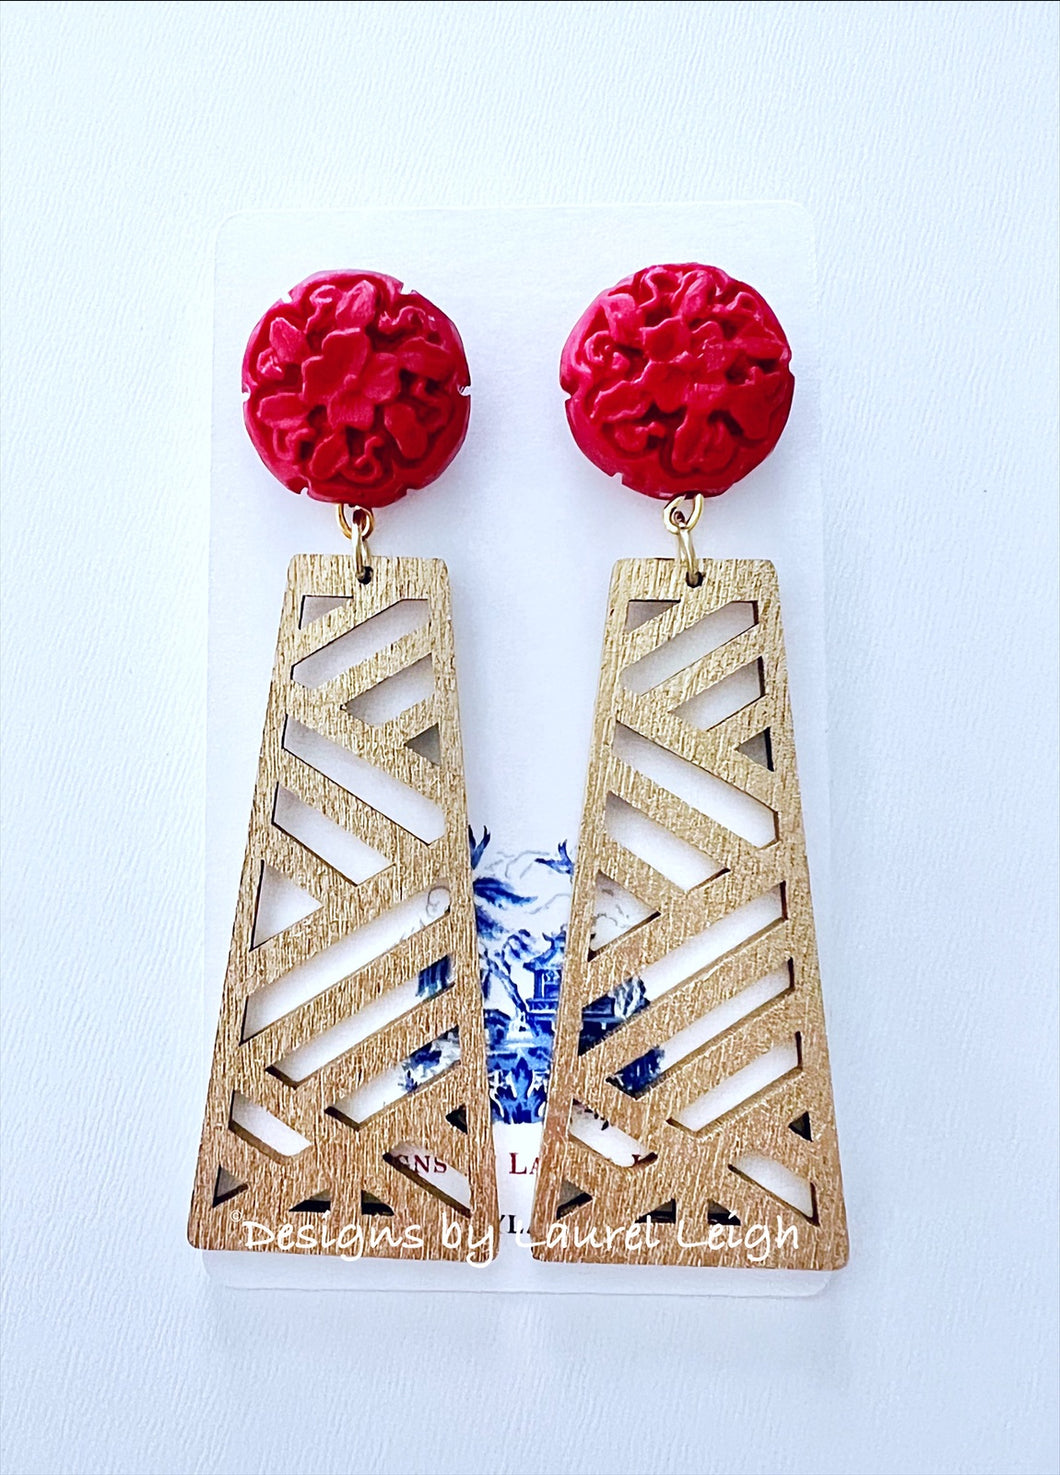 Chinoiserie Chippendale Earrings - Chinoiserie jewelry